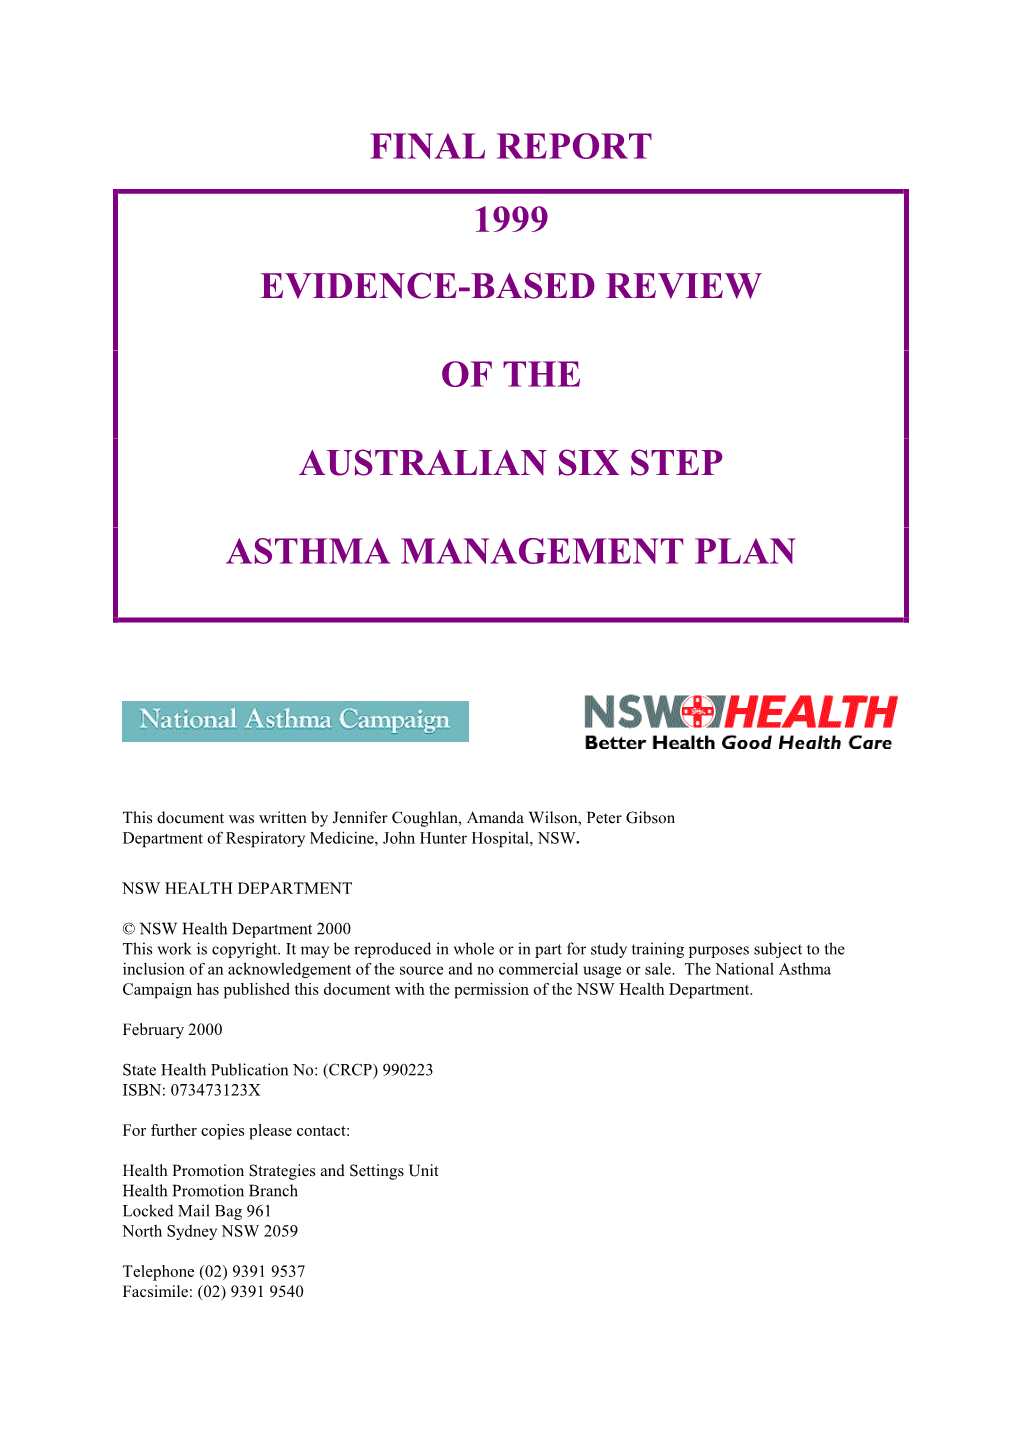 1999 Evidence Based Review of the Australian Six Step Asthma